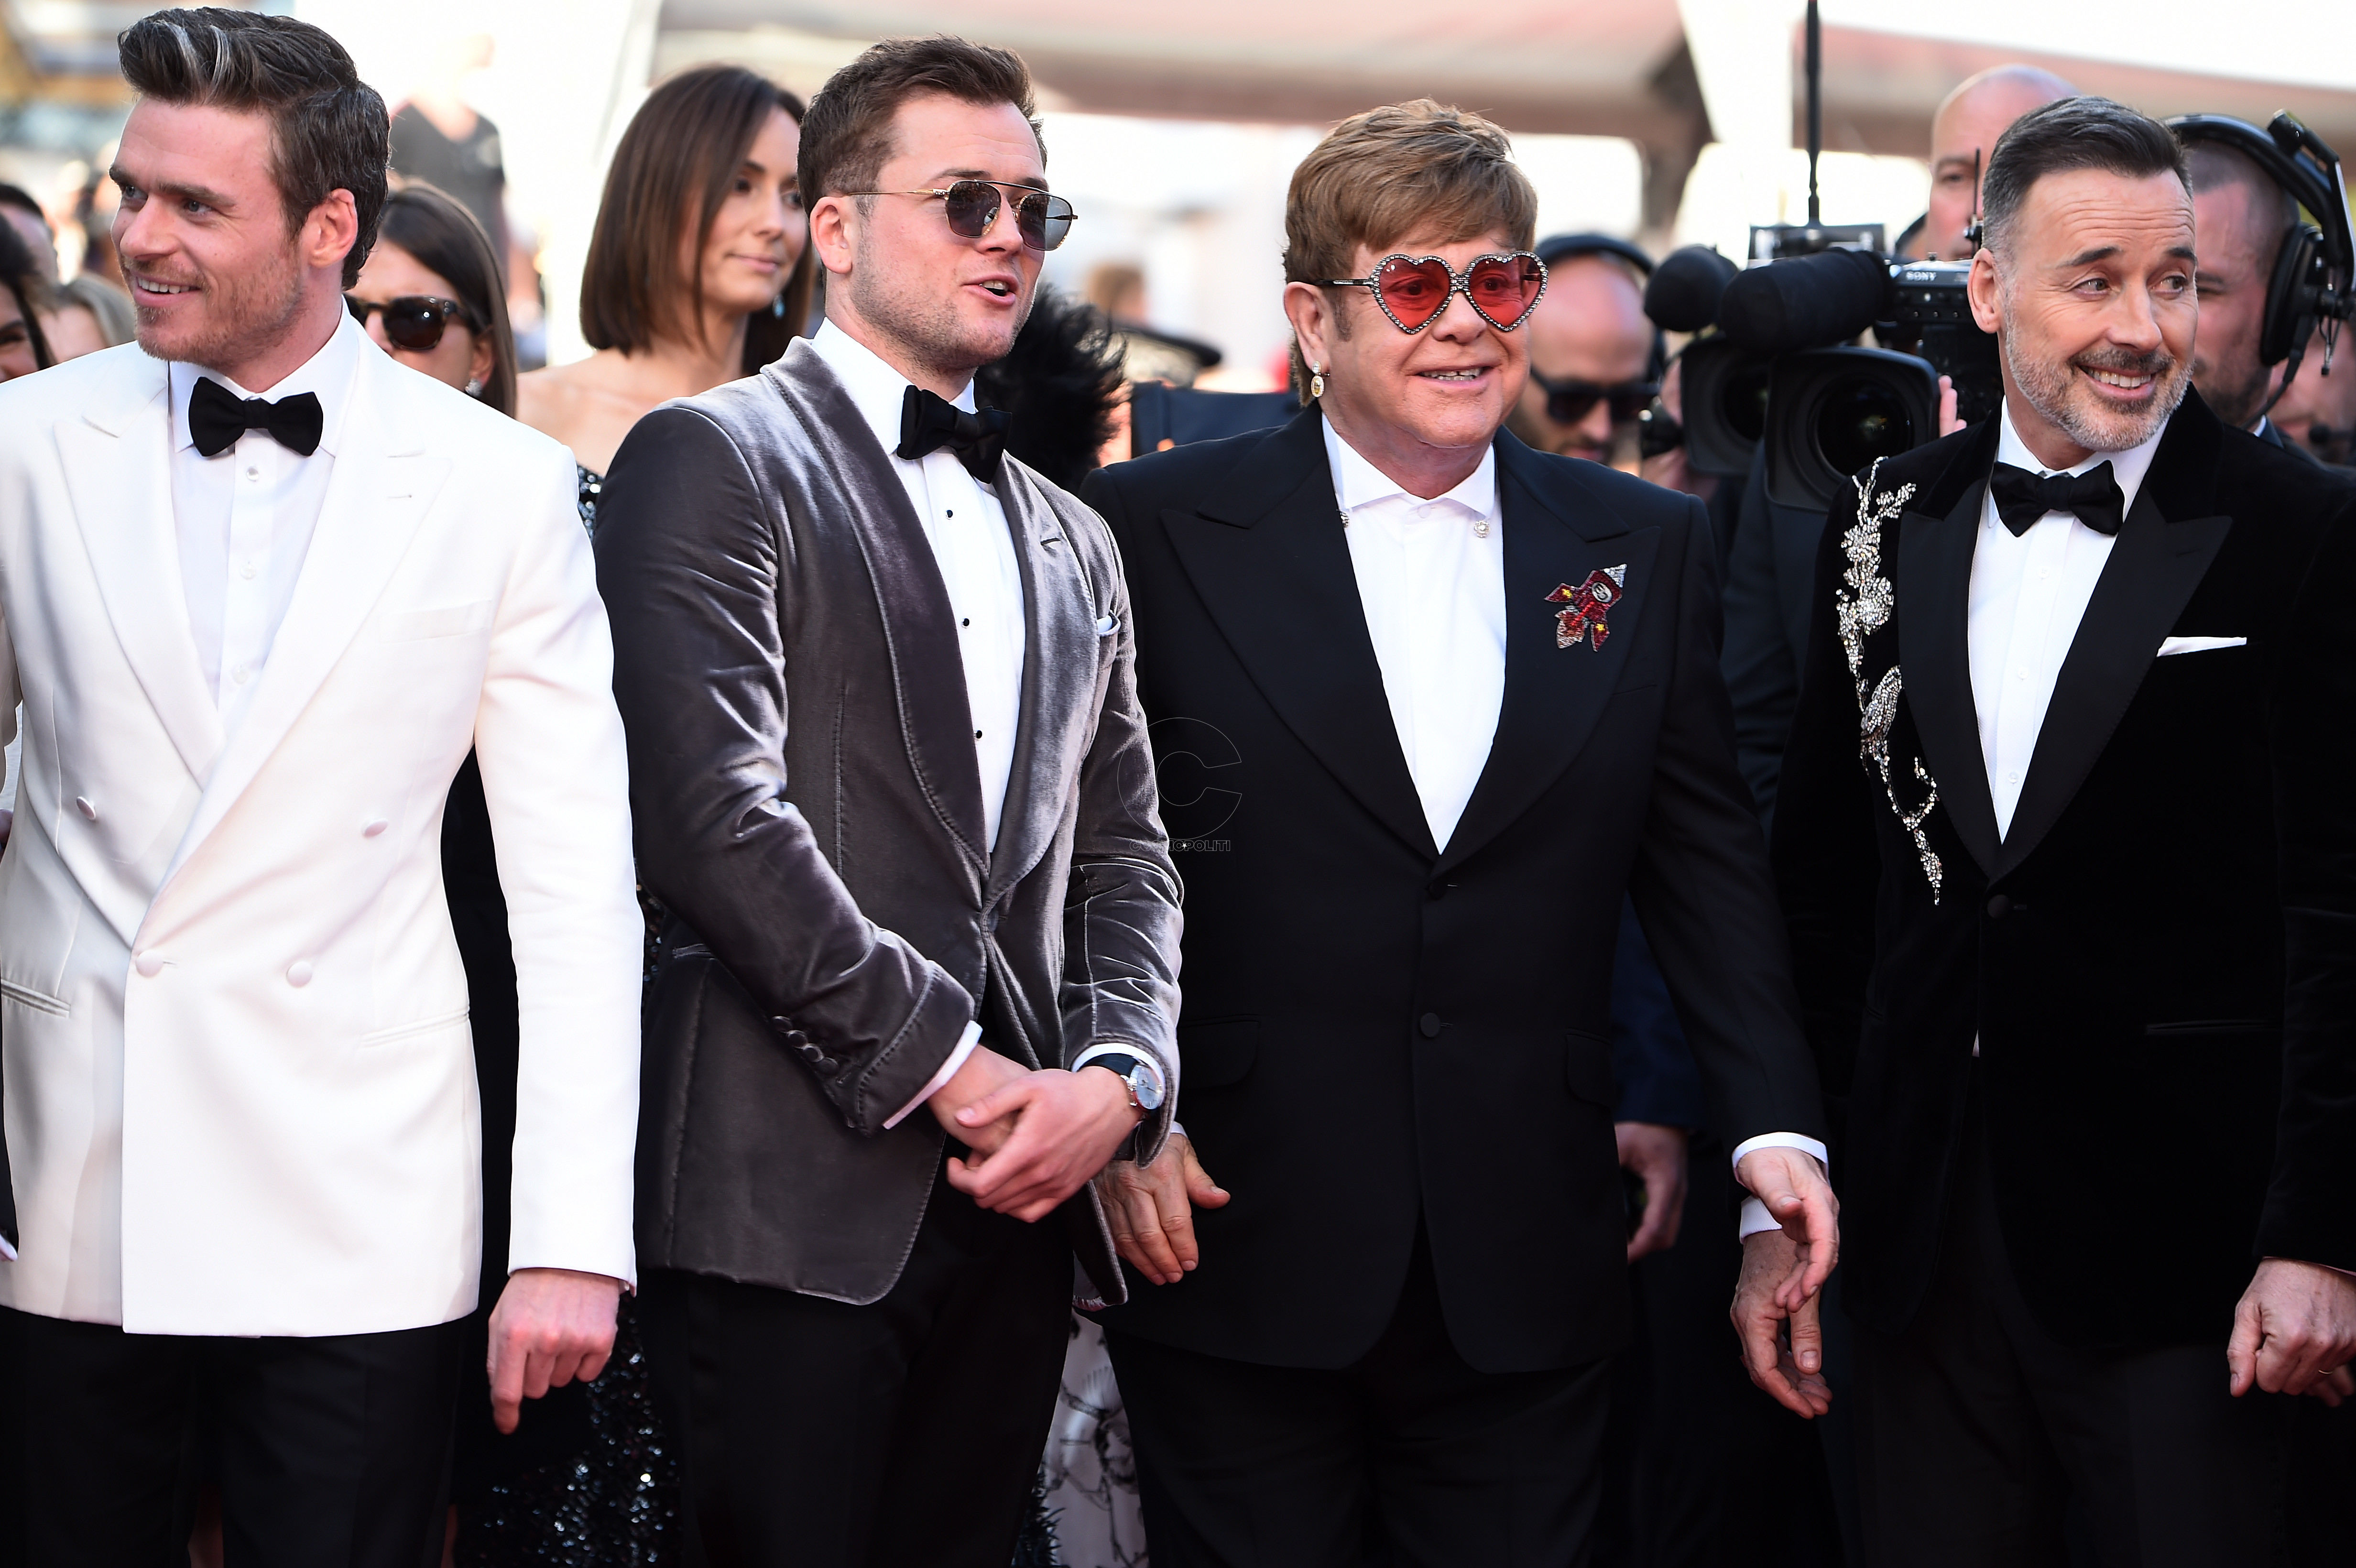 CANNES, FRANCE - MAY 16:  Richard Madden, Taron Egerton, Elton John and David Furnish attend the screening of "Rocket Man" during the 72nd annual Cannes Film Festival on May 16, 2019 in Cannes, France. (Photo by Pascal Le Segretain/Getty Images for Paramount Pictures)